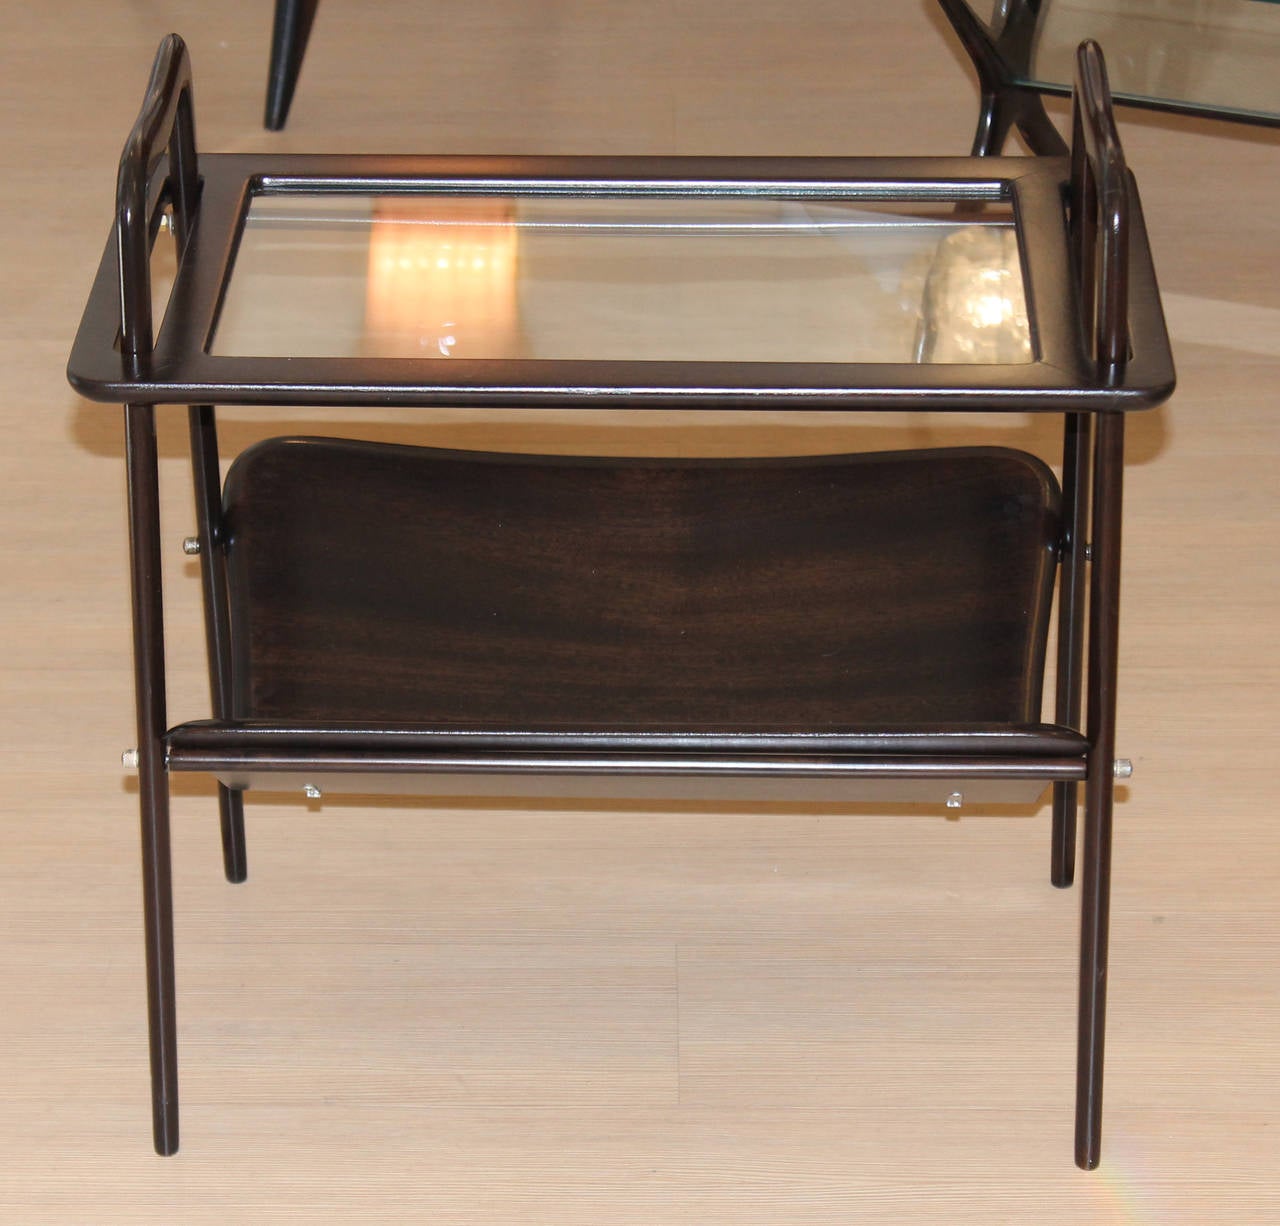 Elegant Italian Mid-Century side table that functions also as a magazine stand and drink serving tray. The top is the removable tray that fits through two slots or handles in the table. The angular wood lower level is the magazine stand.